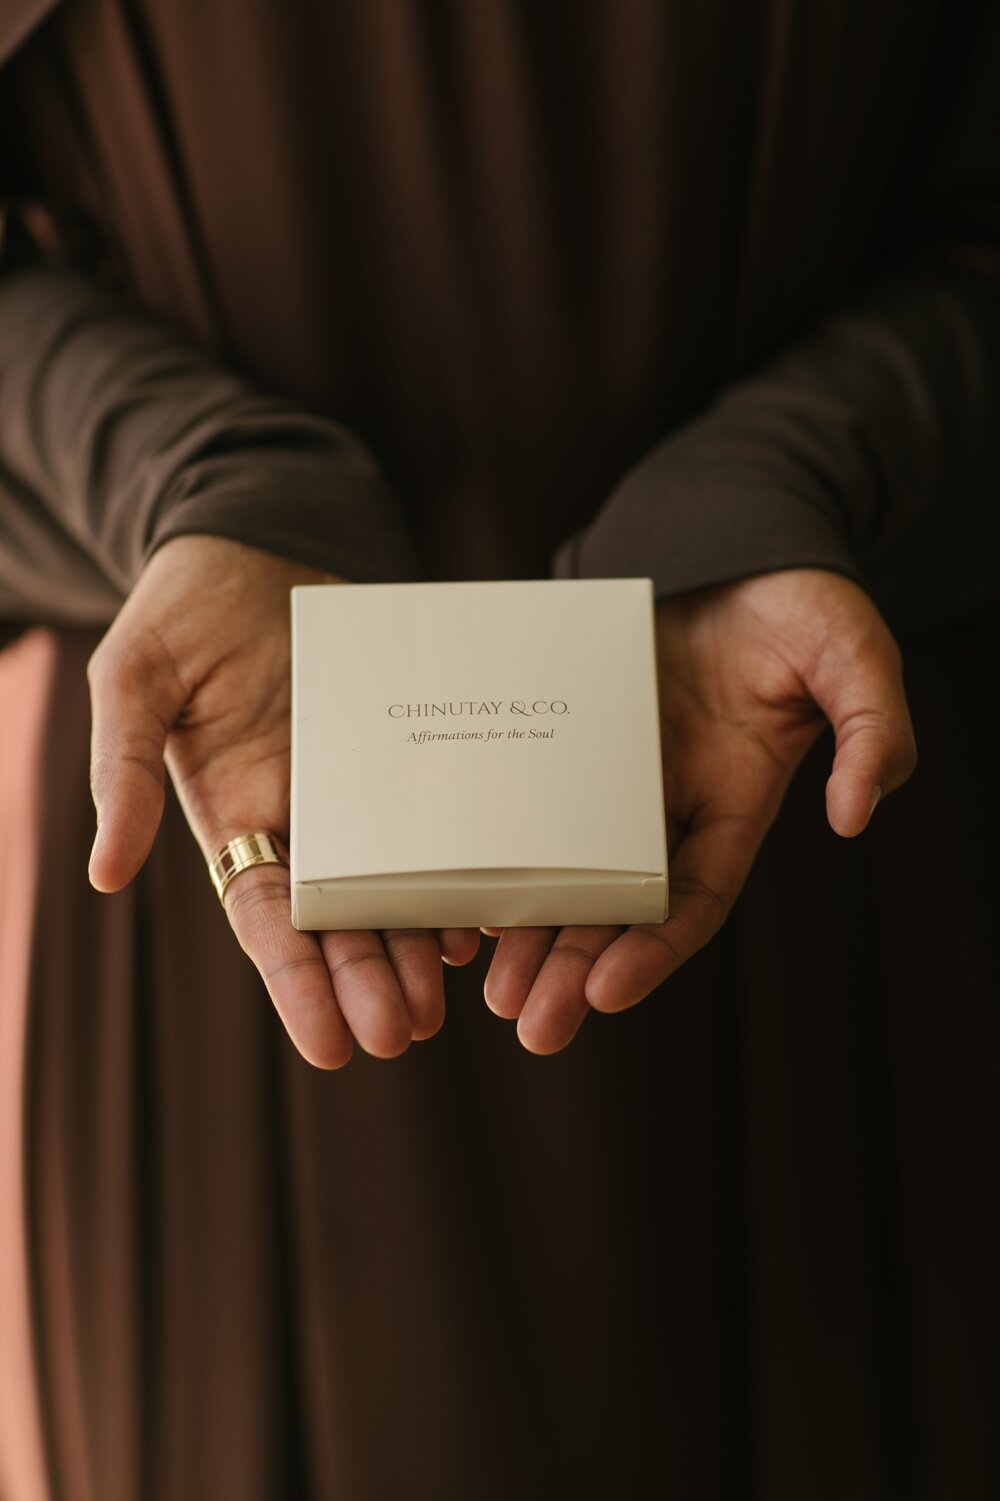 A person holding a box of Chinutay & Co self affirmation cards.